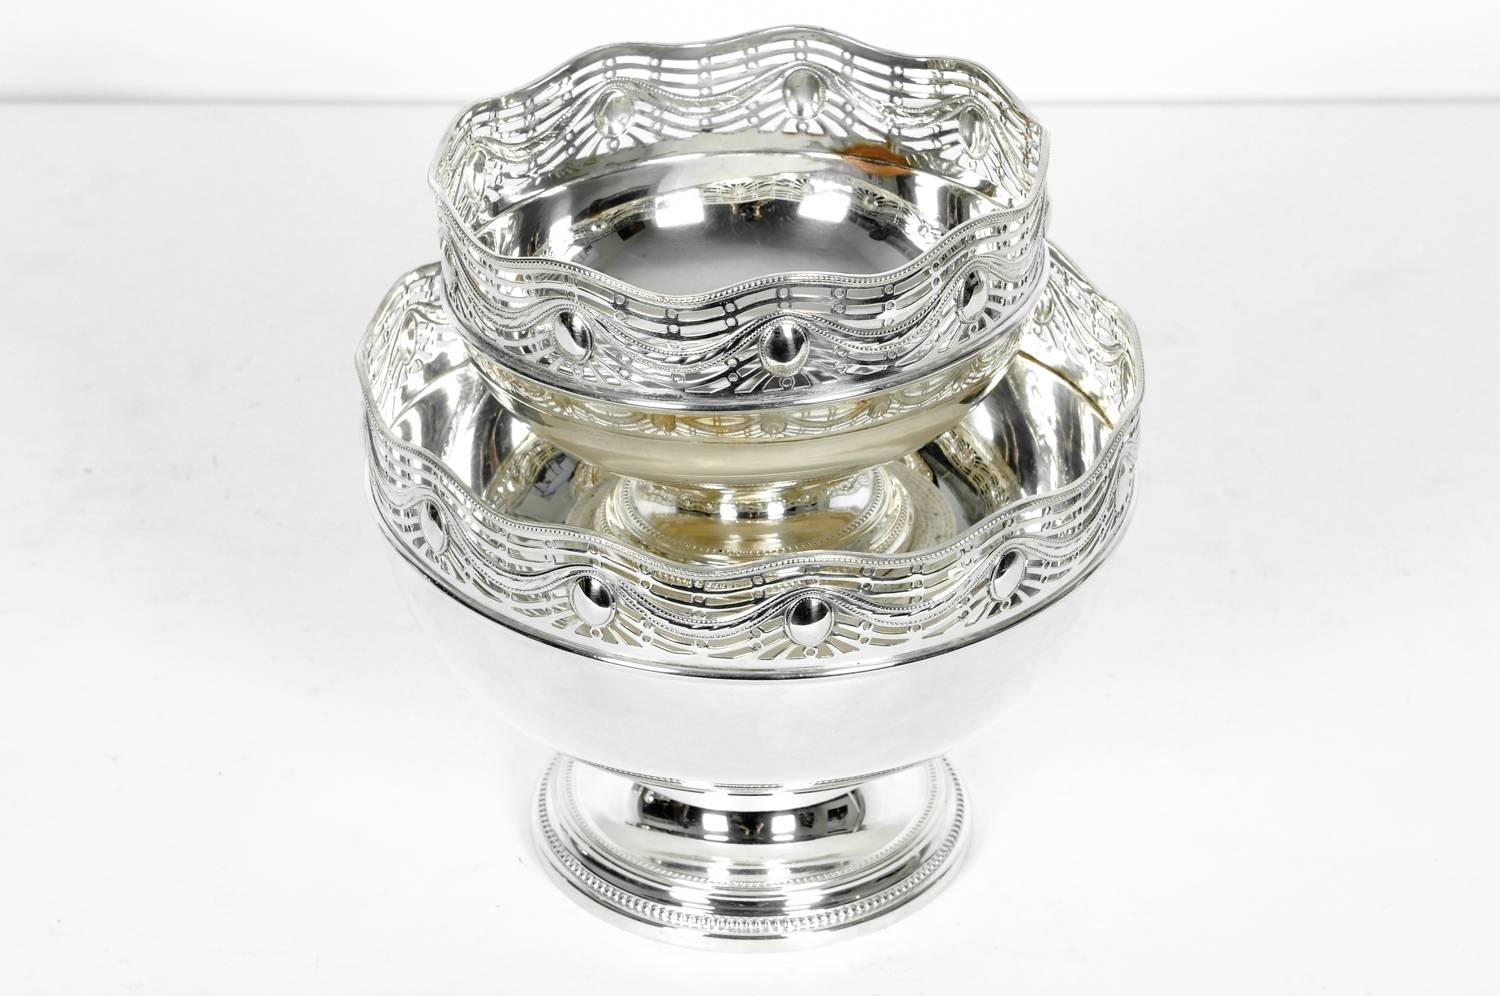 Old English silver plated two pieces centre table set. All in excellent condition. The taller piece measure 8.5 inches diameter x 6 inches high. The other piece measure 6.5 diameter x 4.5 inches high.